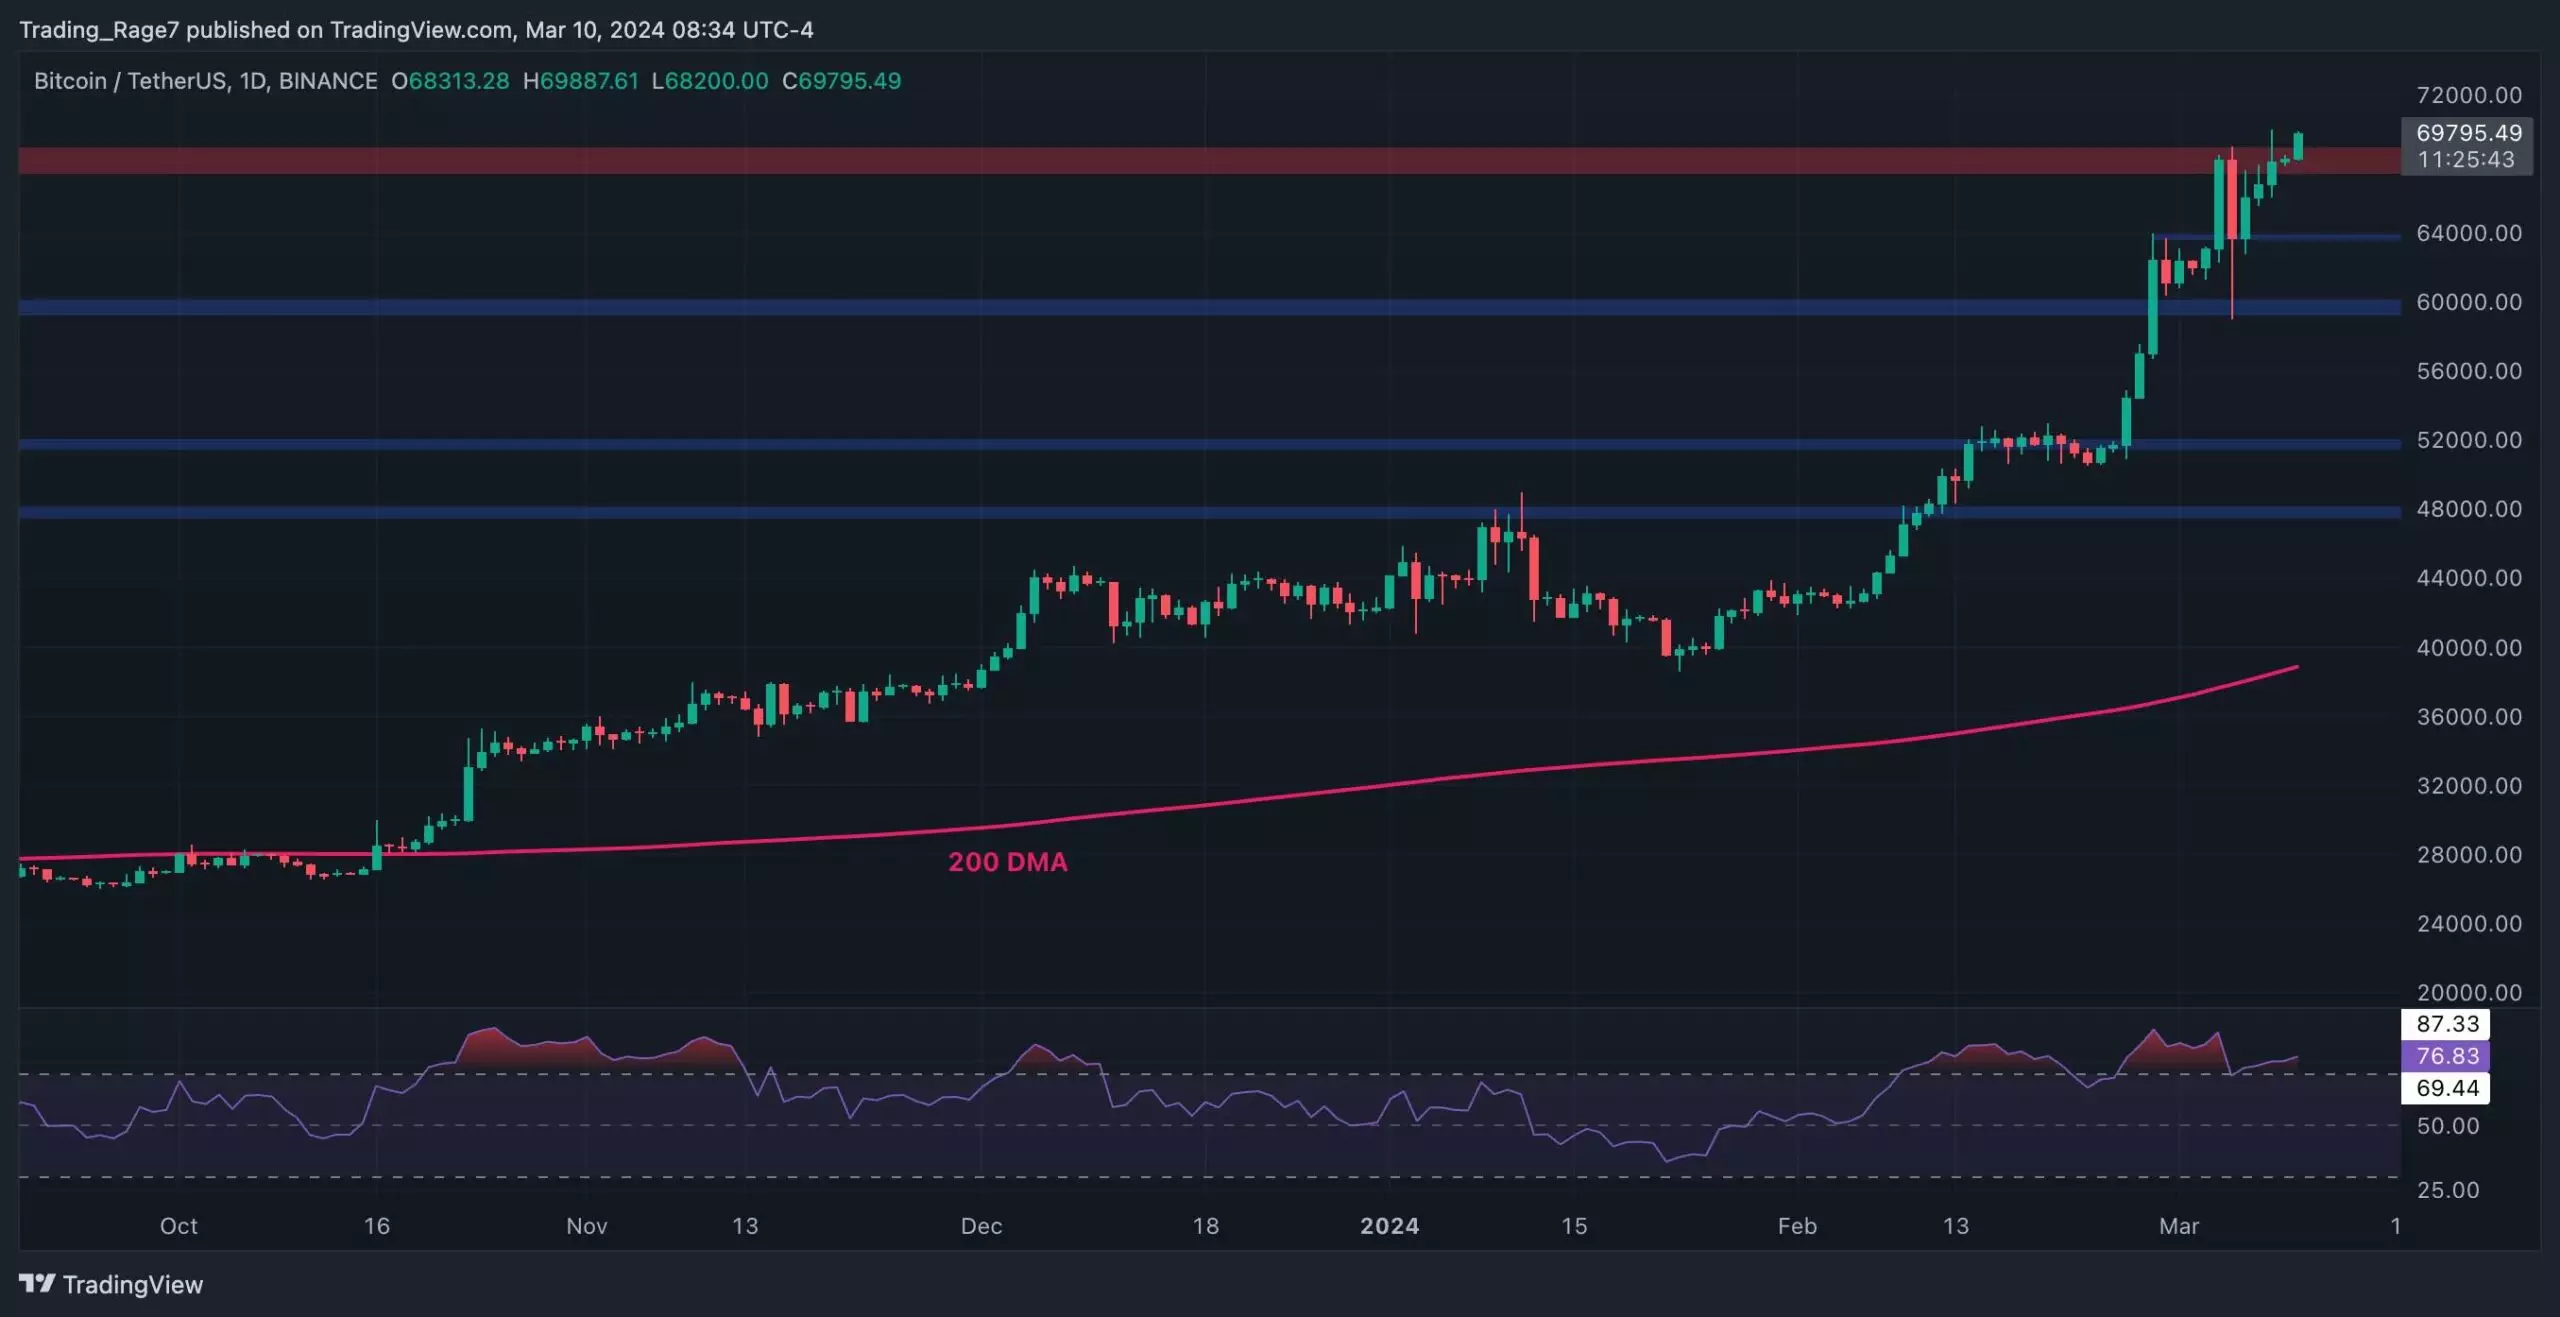 Bitcoin Price Analysis and Predictions